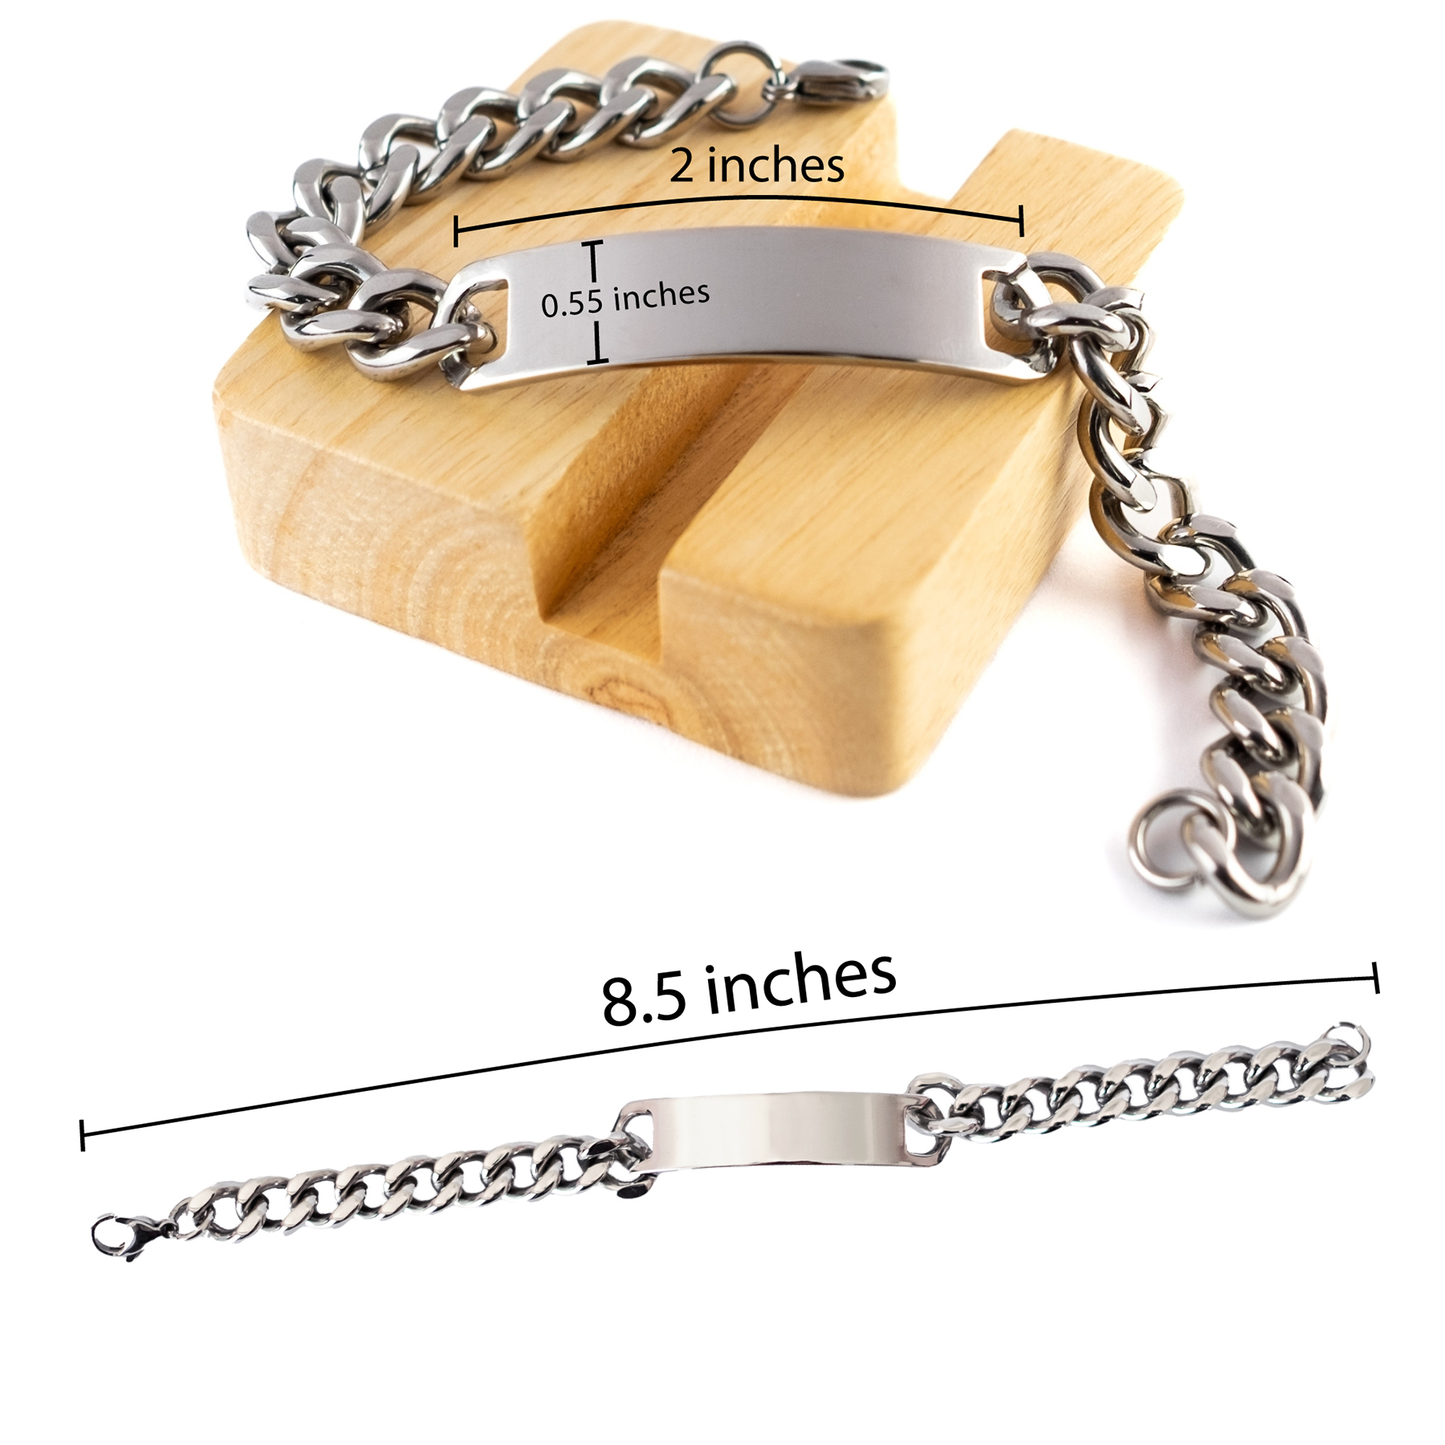 Bonus Brother Motivational Gifts from Brother, Remember to never give up no matter what, Inspirational Birthday Cuban Chain Stainless Steel Bracelet for Bonus Brother